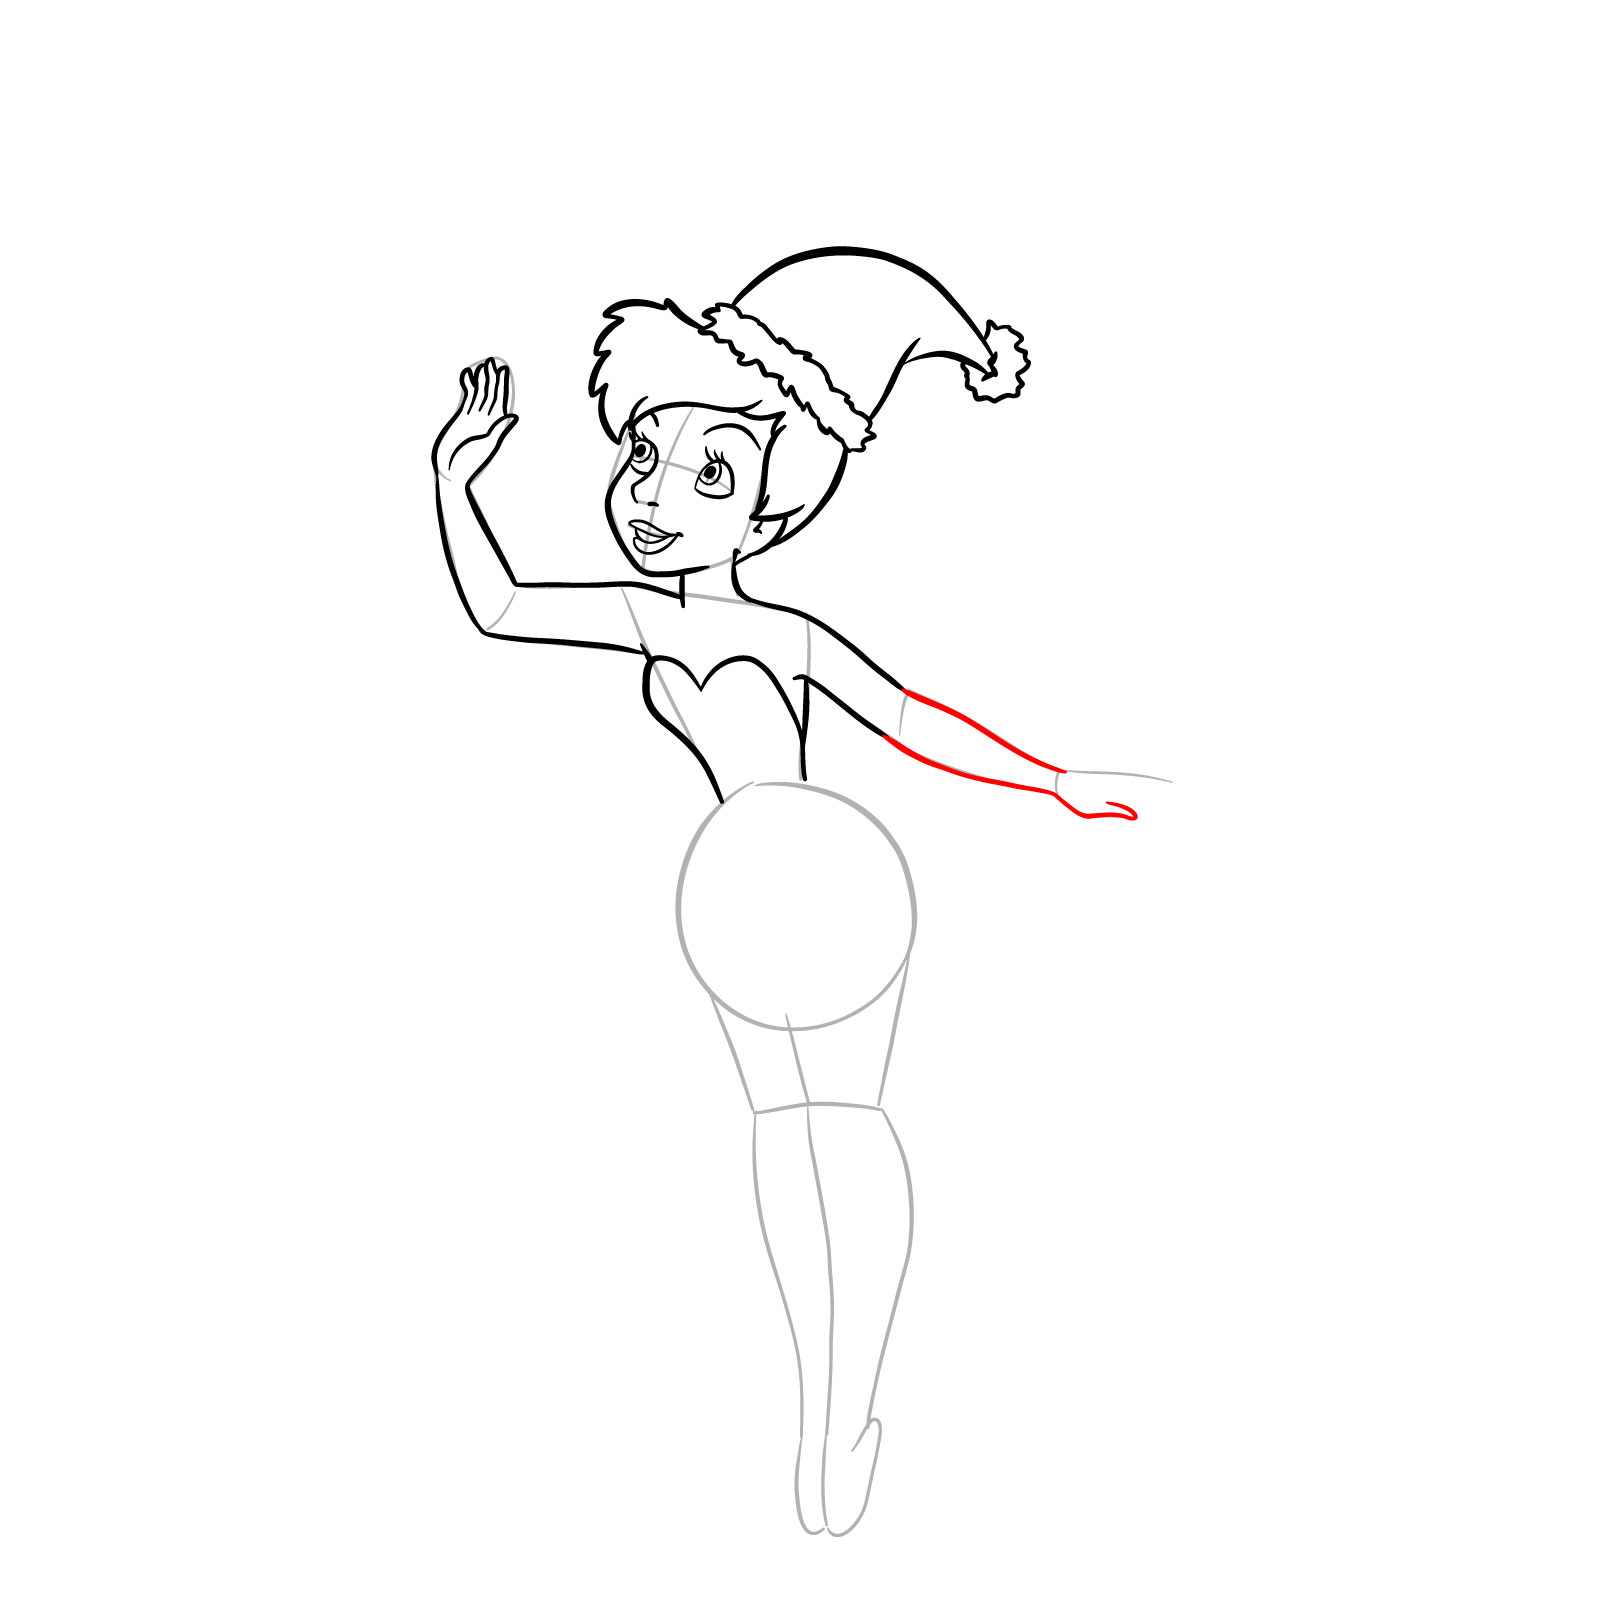 How to draw Tinker Bell in a Christmas costume - step 18